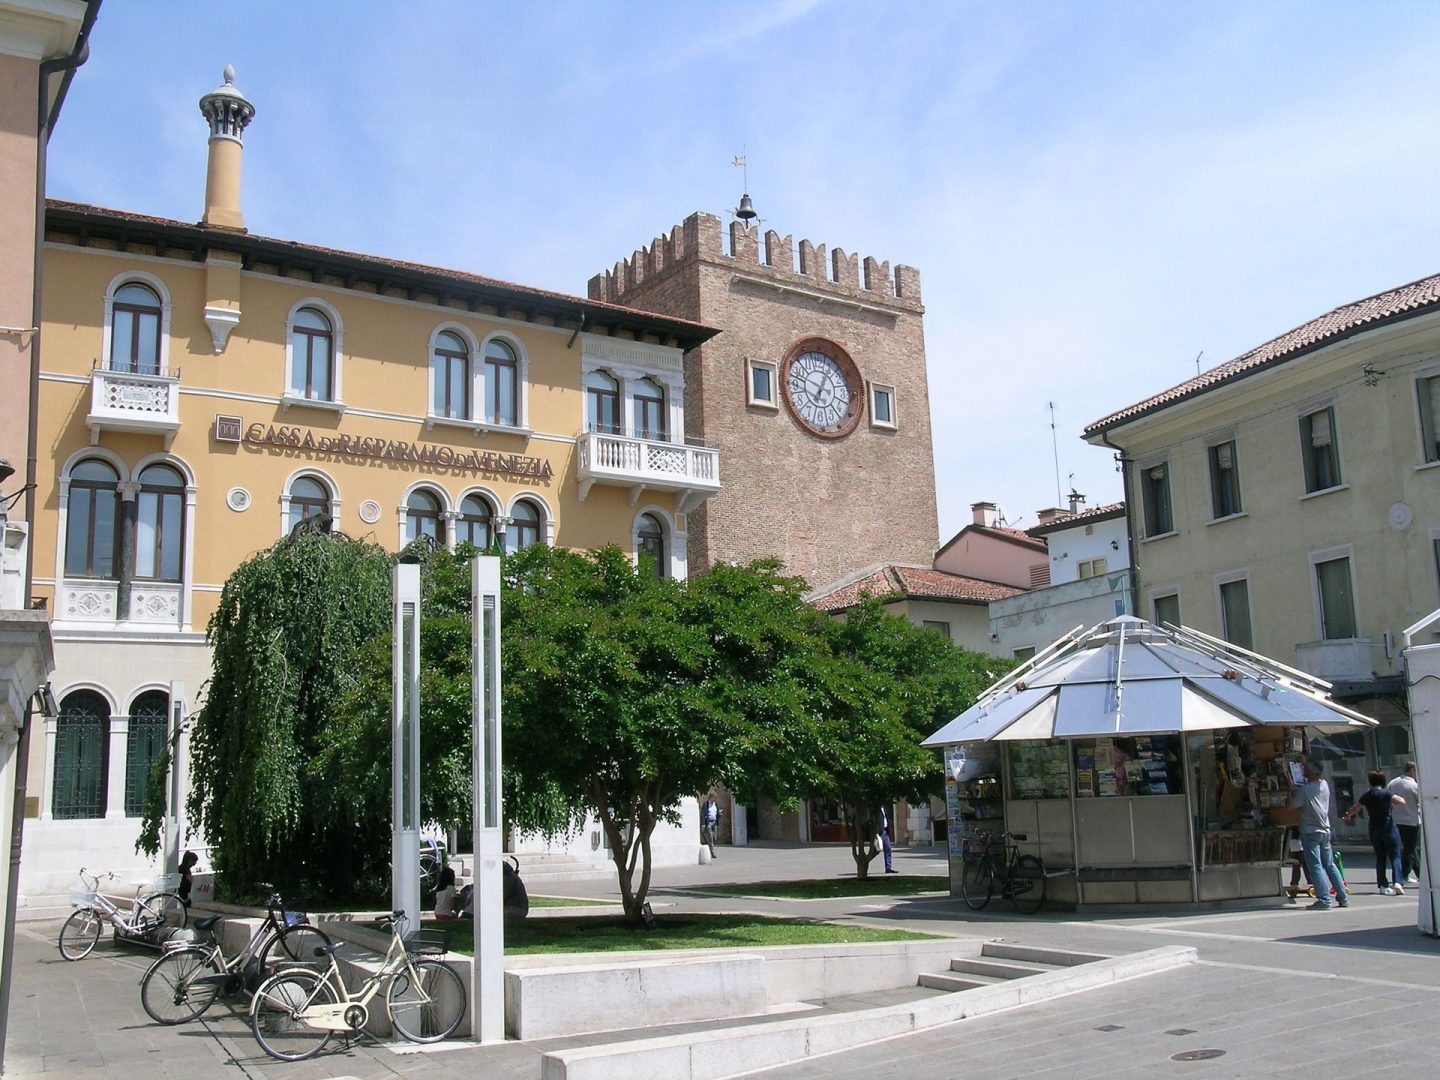 The square of Mestre in the historic center with the clock tower in the background